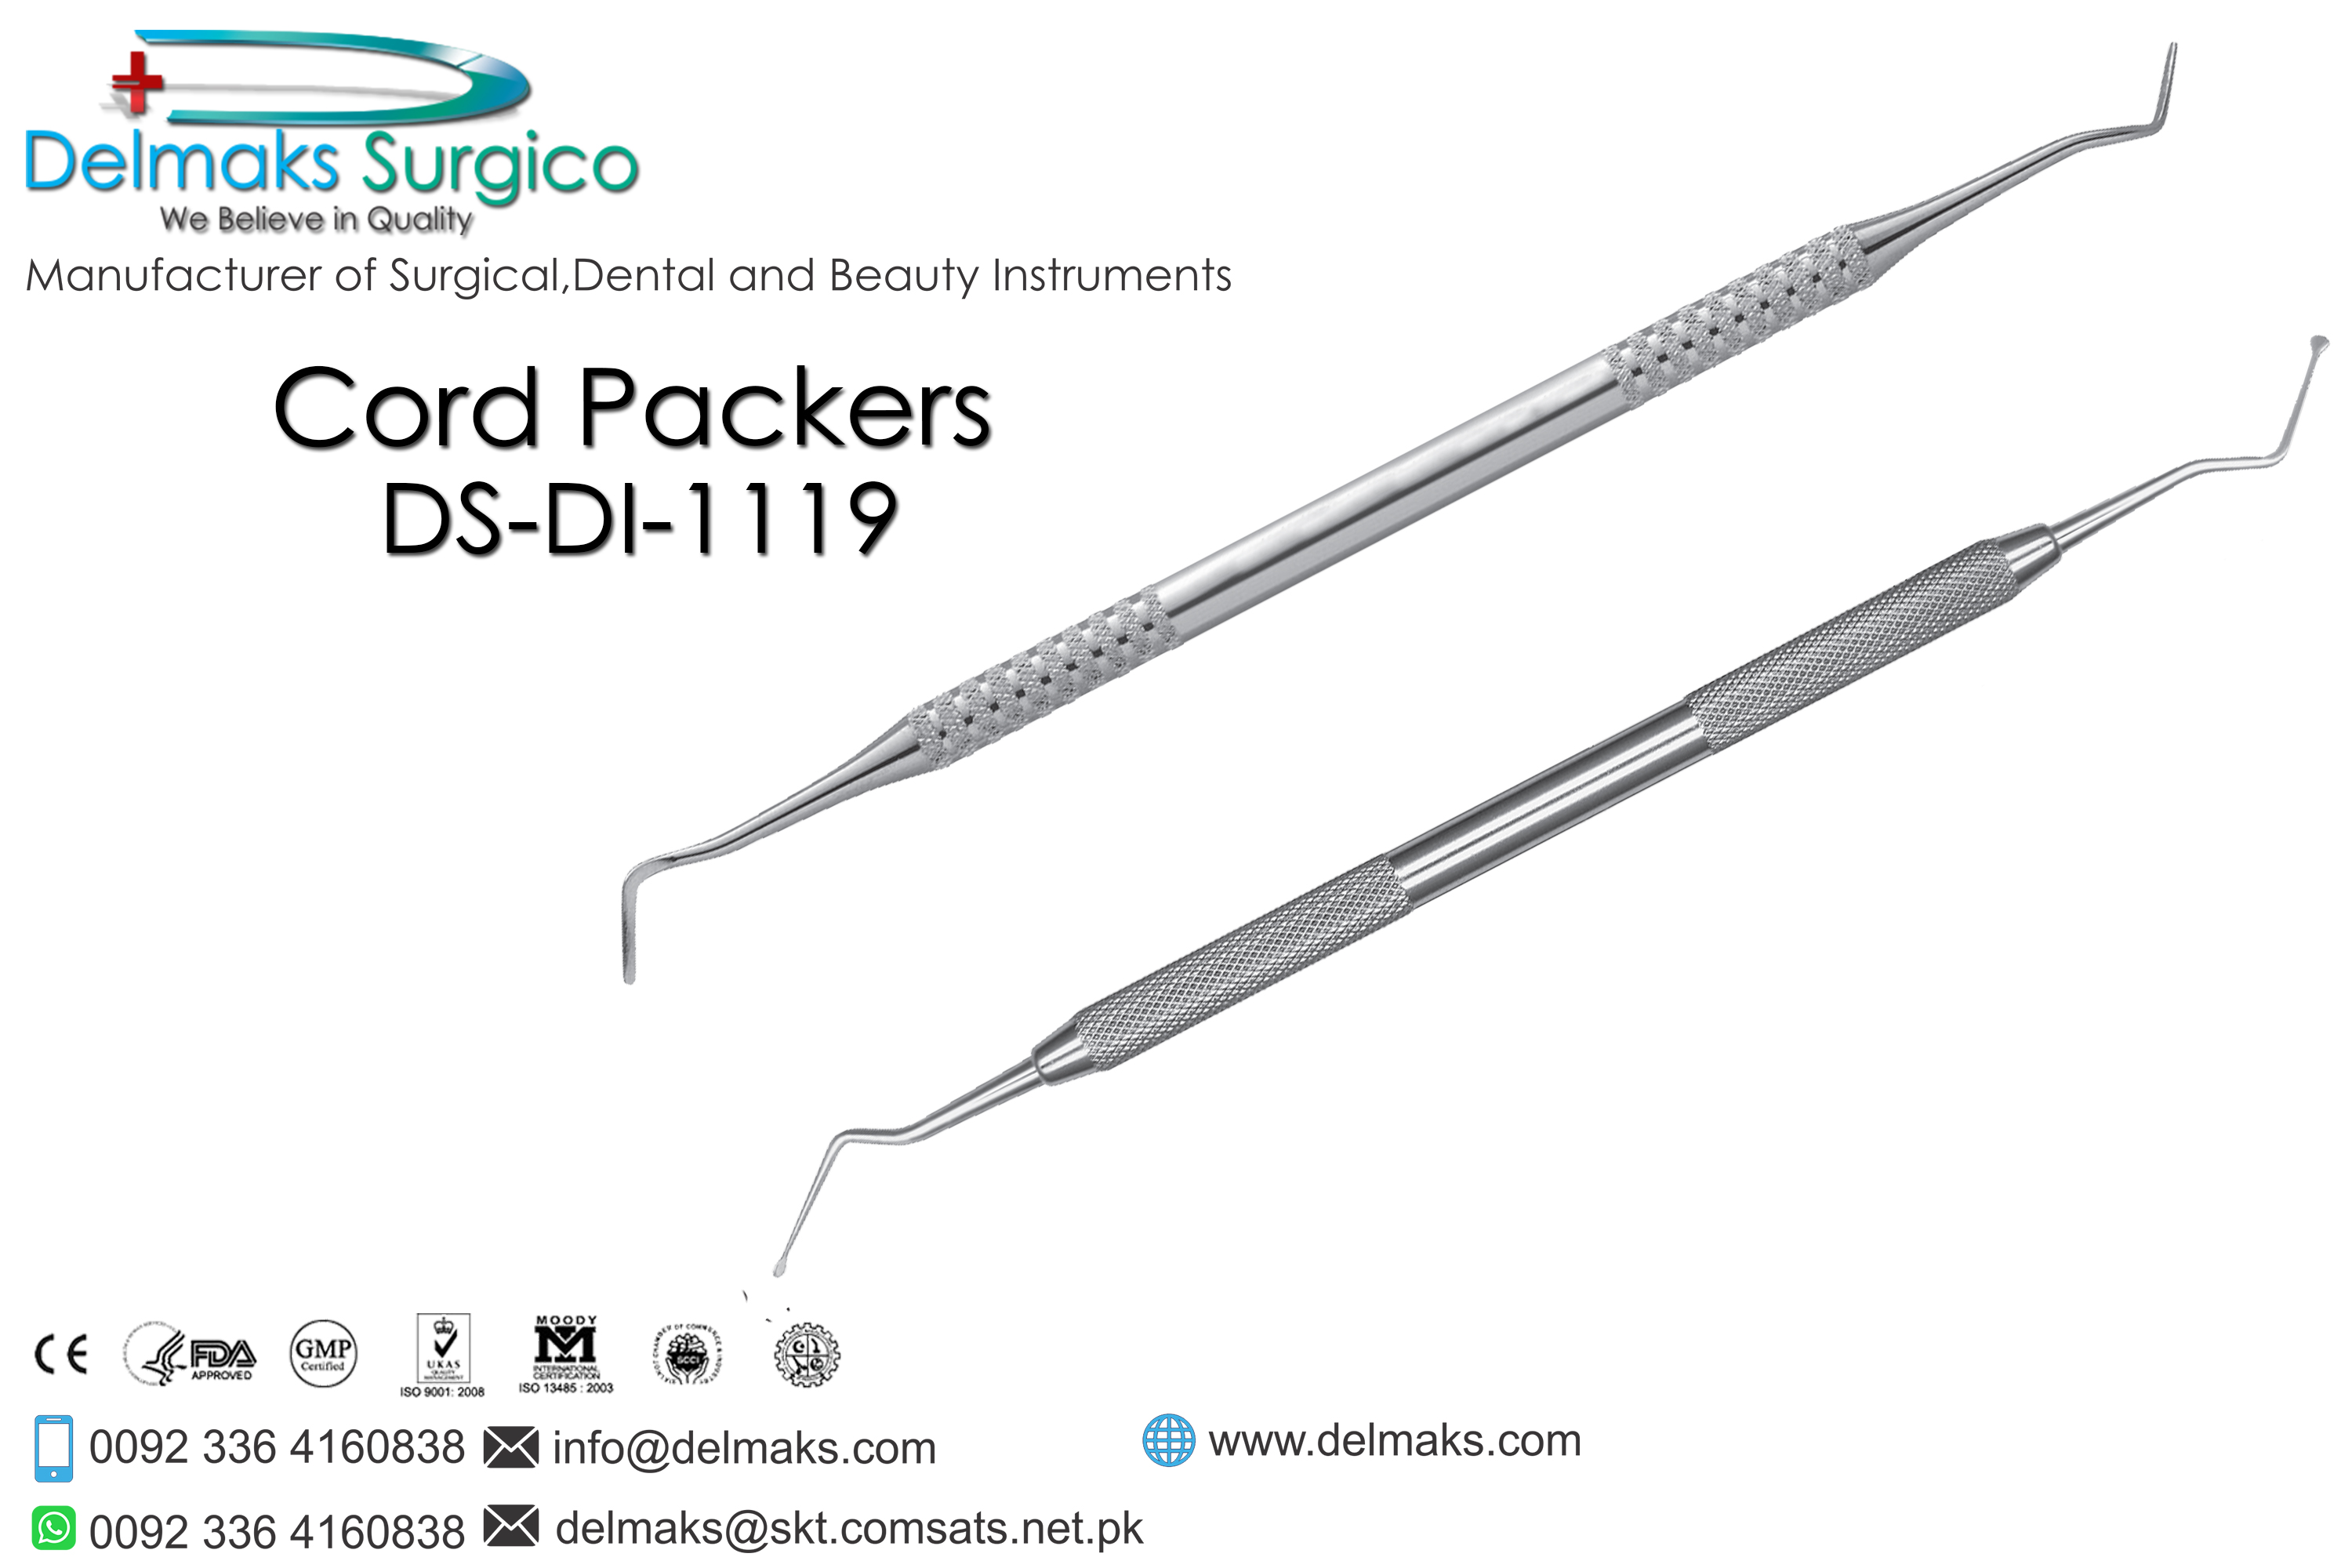 Cord Packers-Crown And Bridge(Fixed Prosthodontics) Instruments-Dental Instruments-Delmaks Surgico